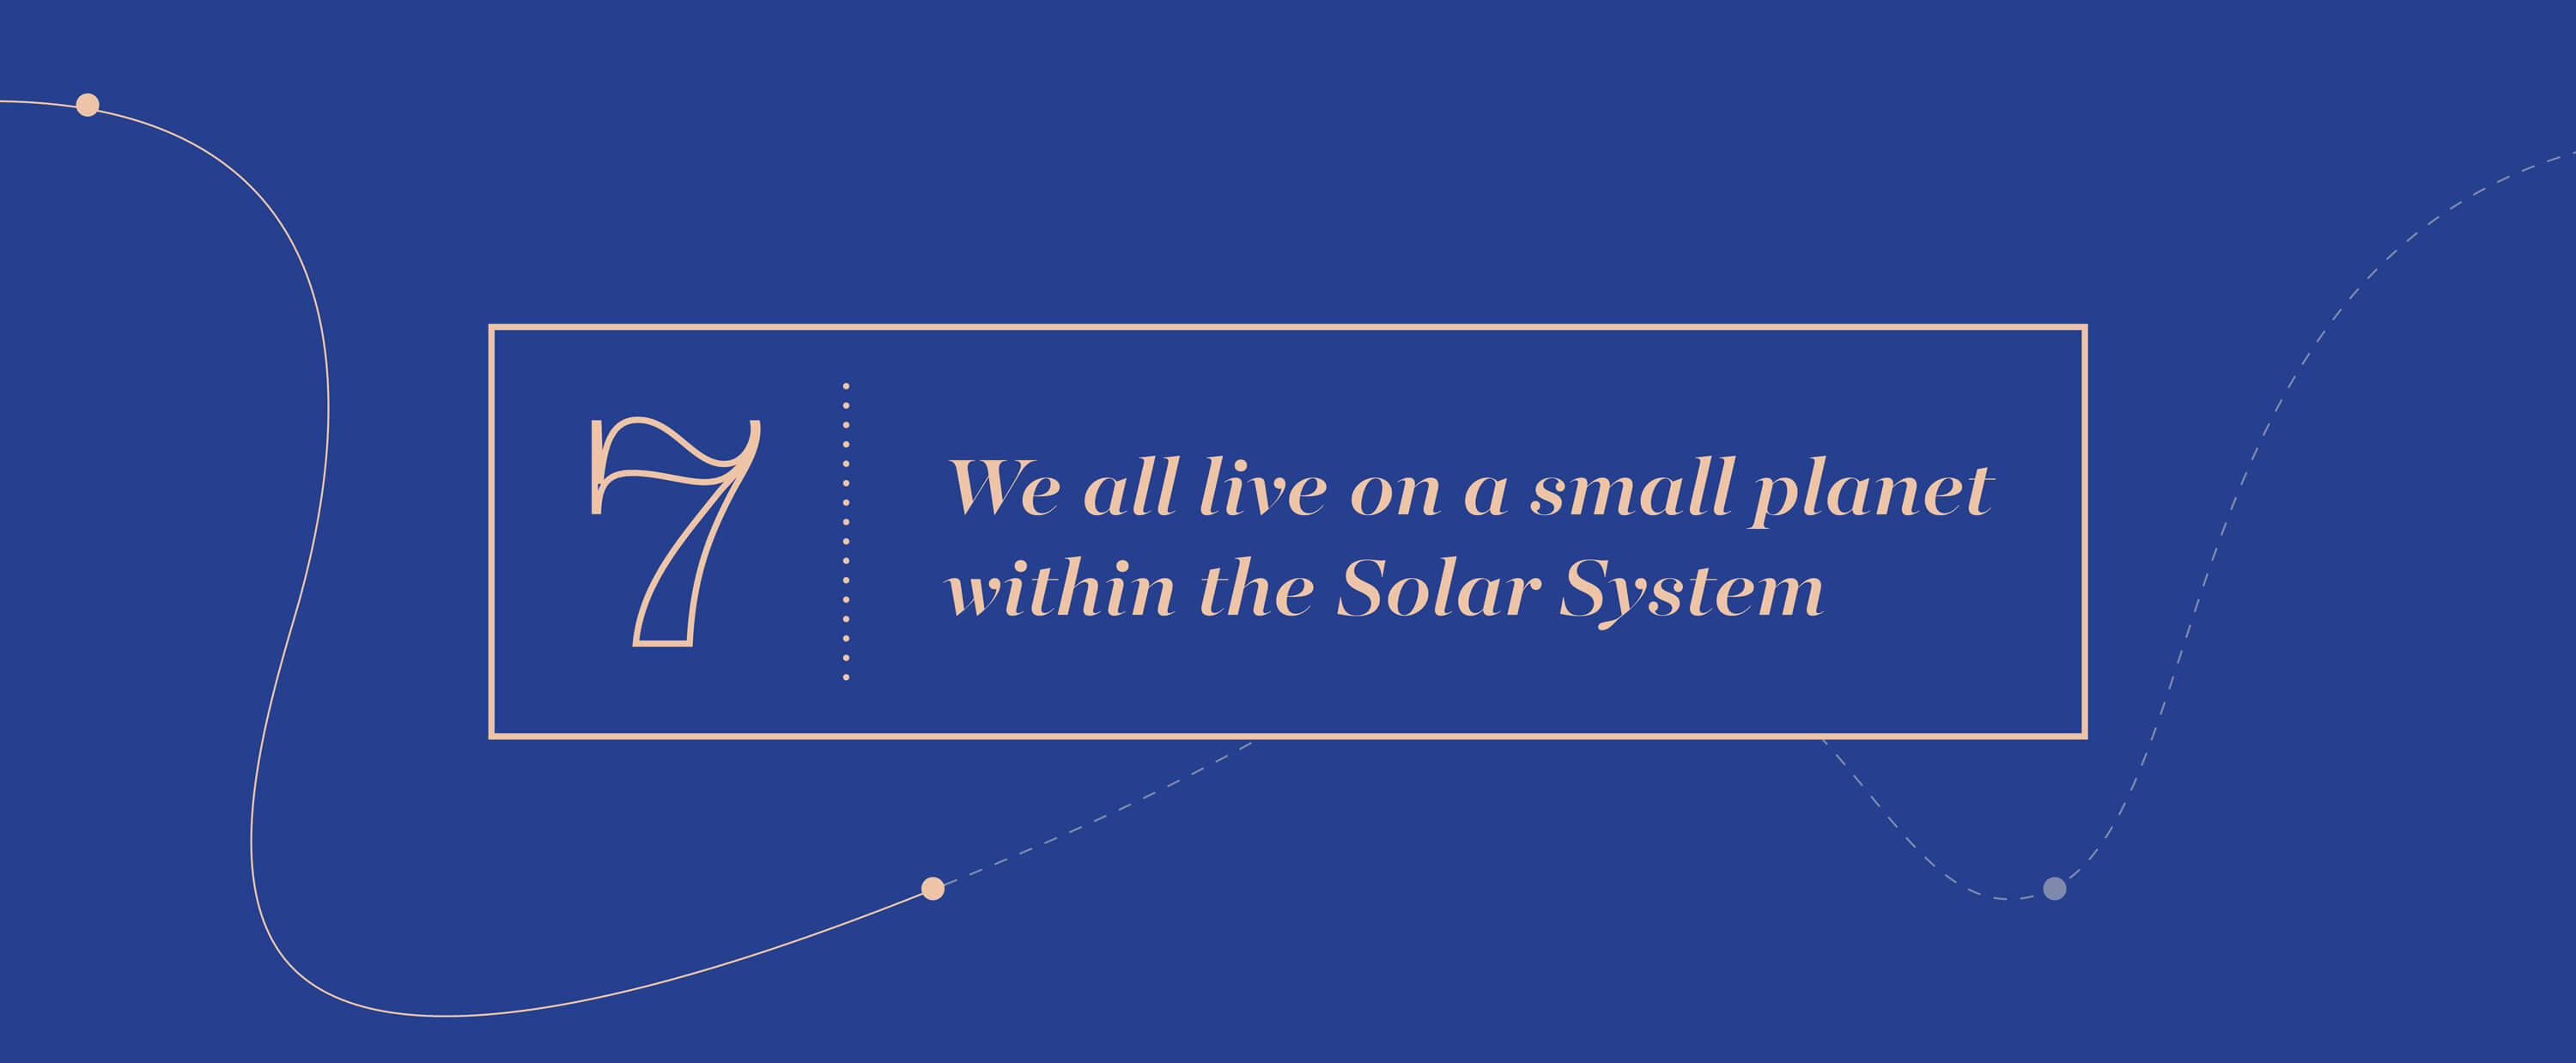 Big Idea 7 - We all live on a small planet within the Solar System